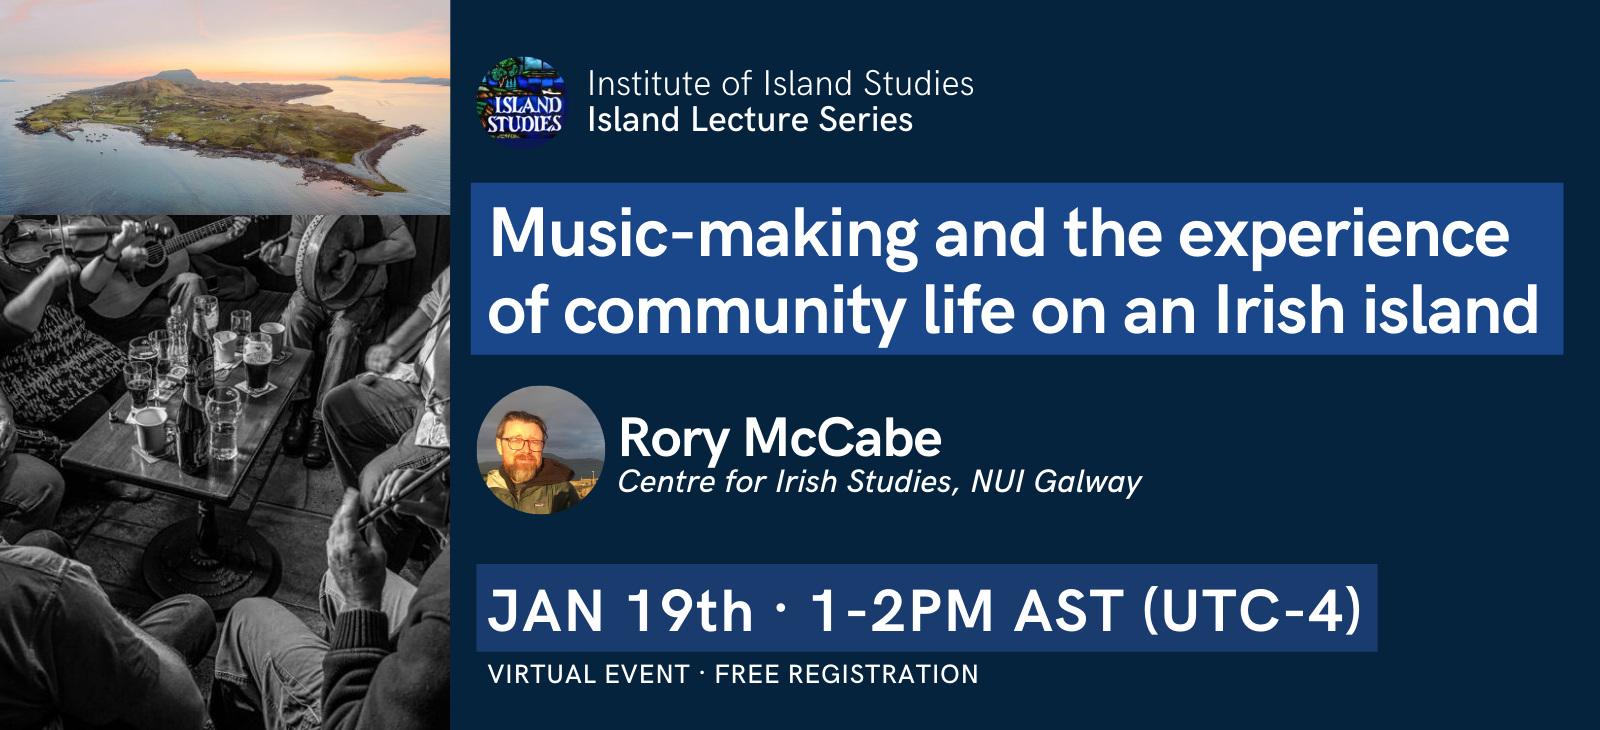 Promotional image with event details. There is also an aerial photograph of Clare Island at sunset, a black and white photo of a group of musicians playing traditional Irish music around a table at a pub, and a headshot of Rory McCabe with Clare Island in the distance behind him.